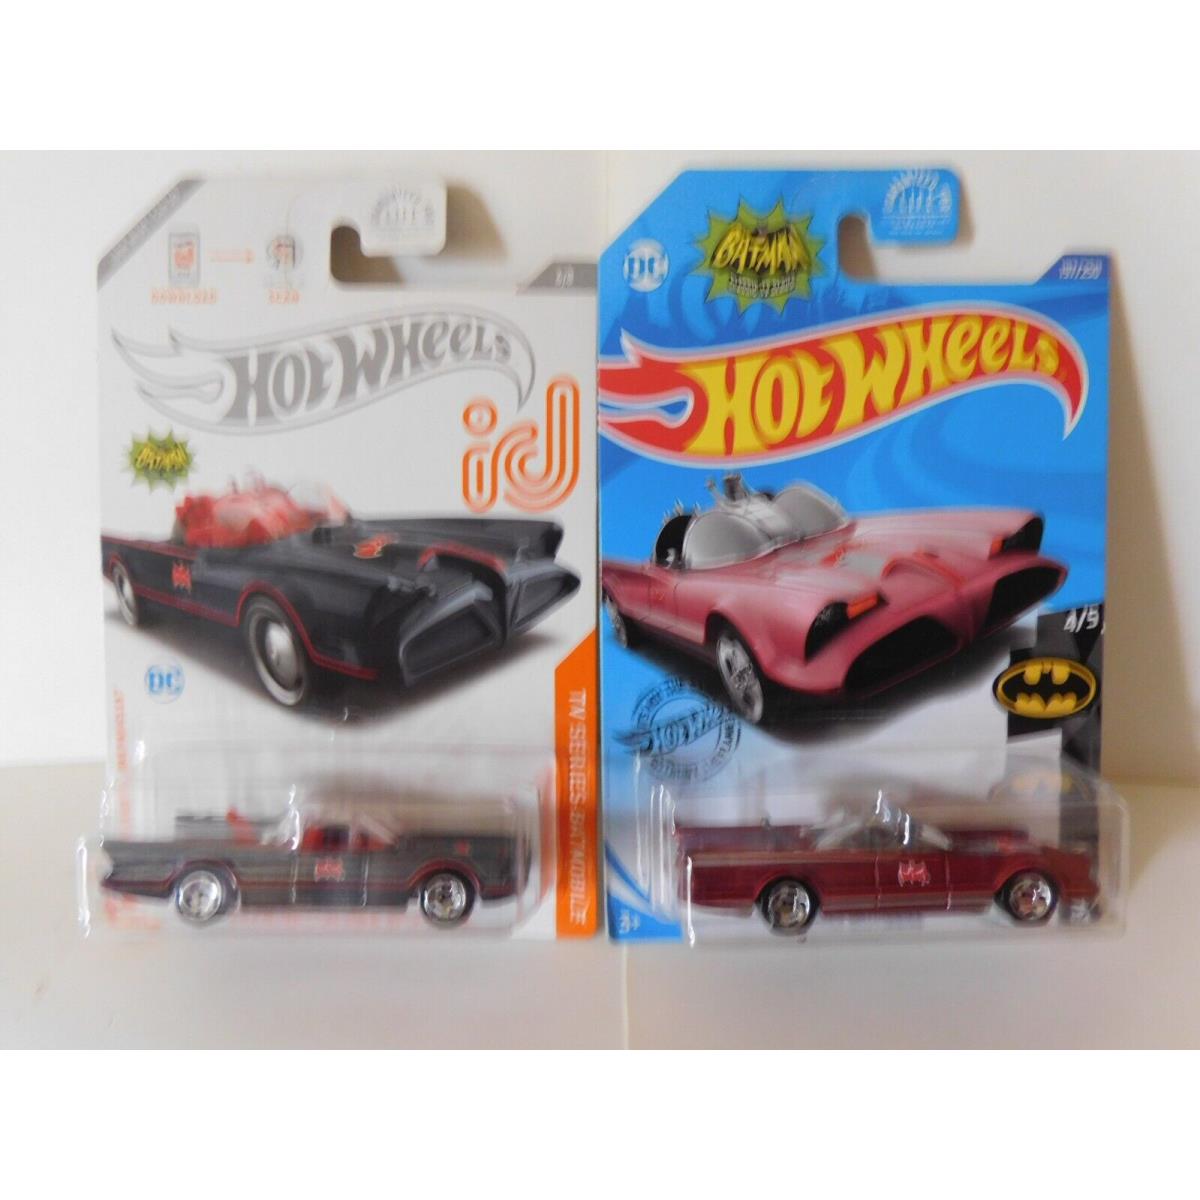 Hot Wheels Batmobiles - Kroger Exclusive and ID Car - Both Limited Edition